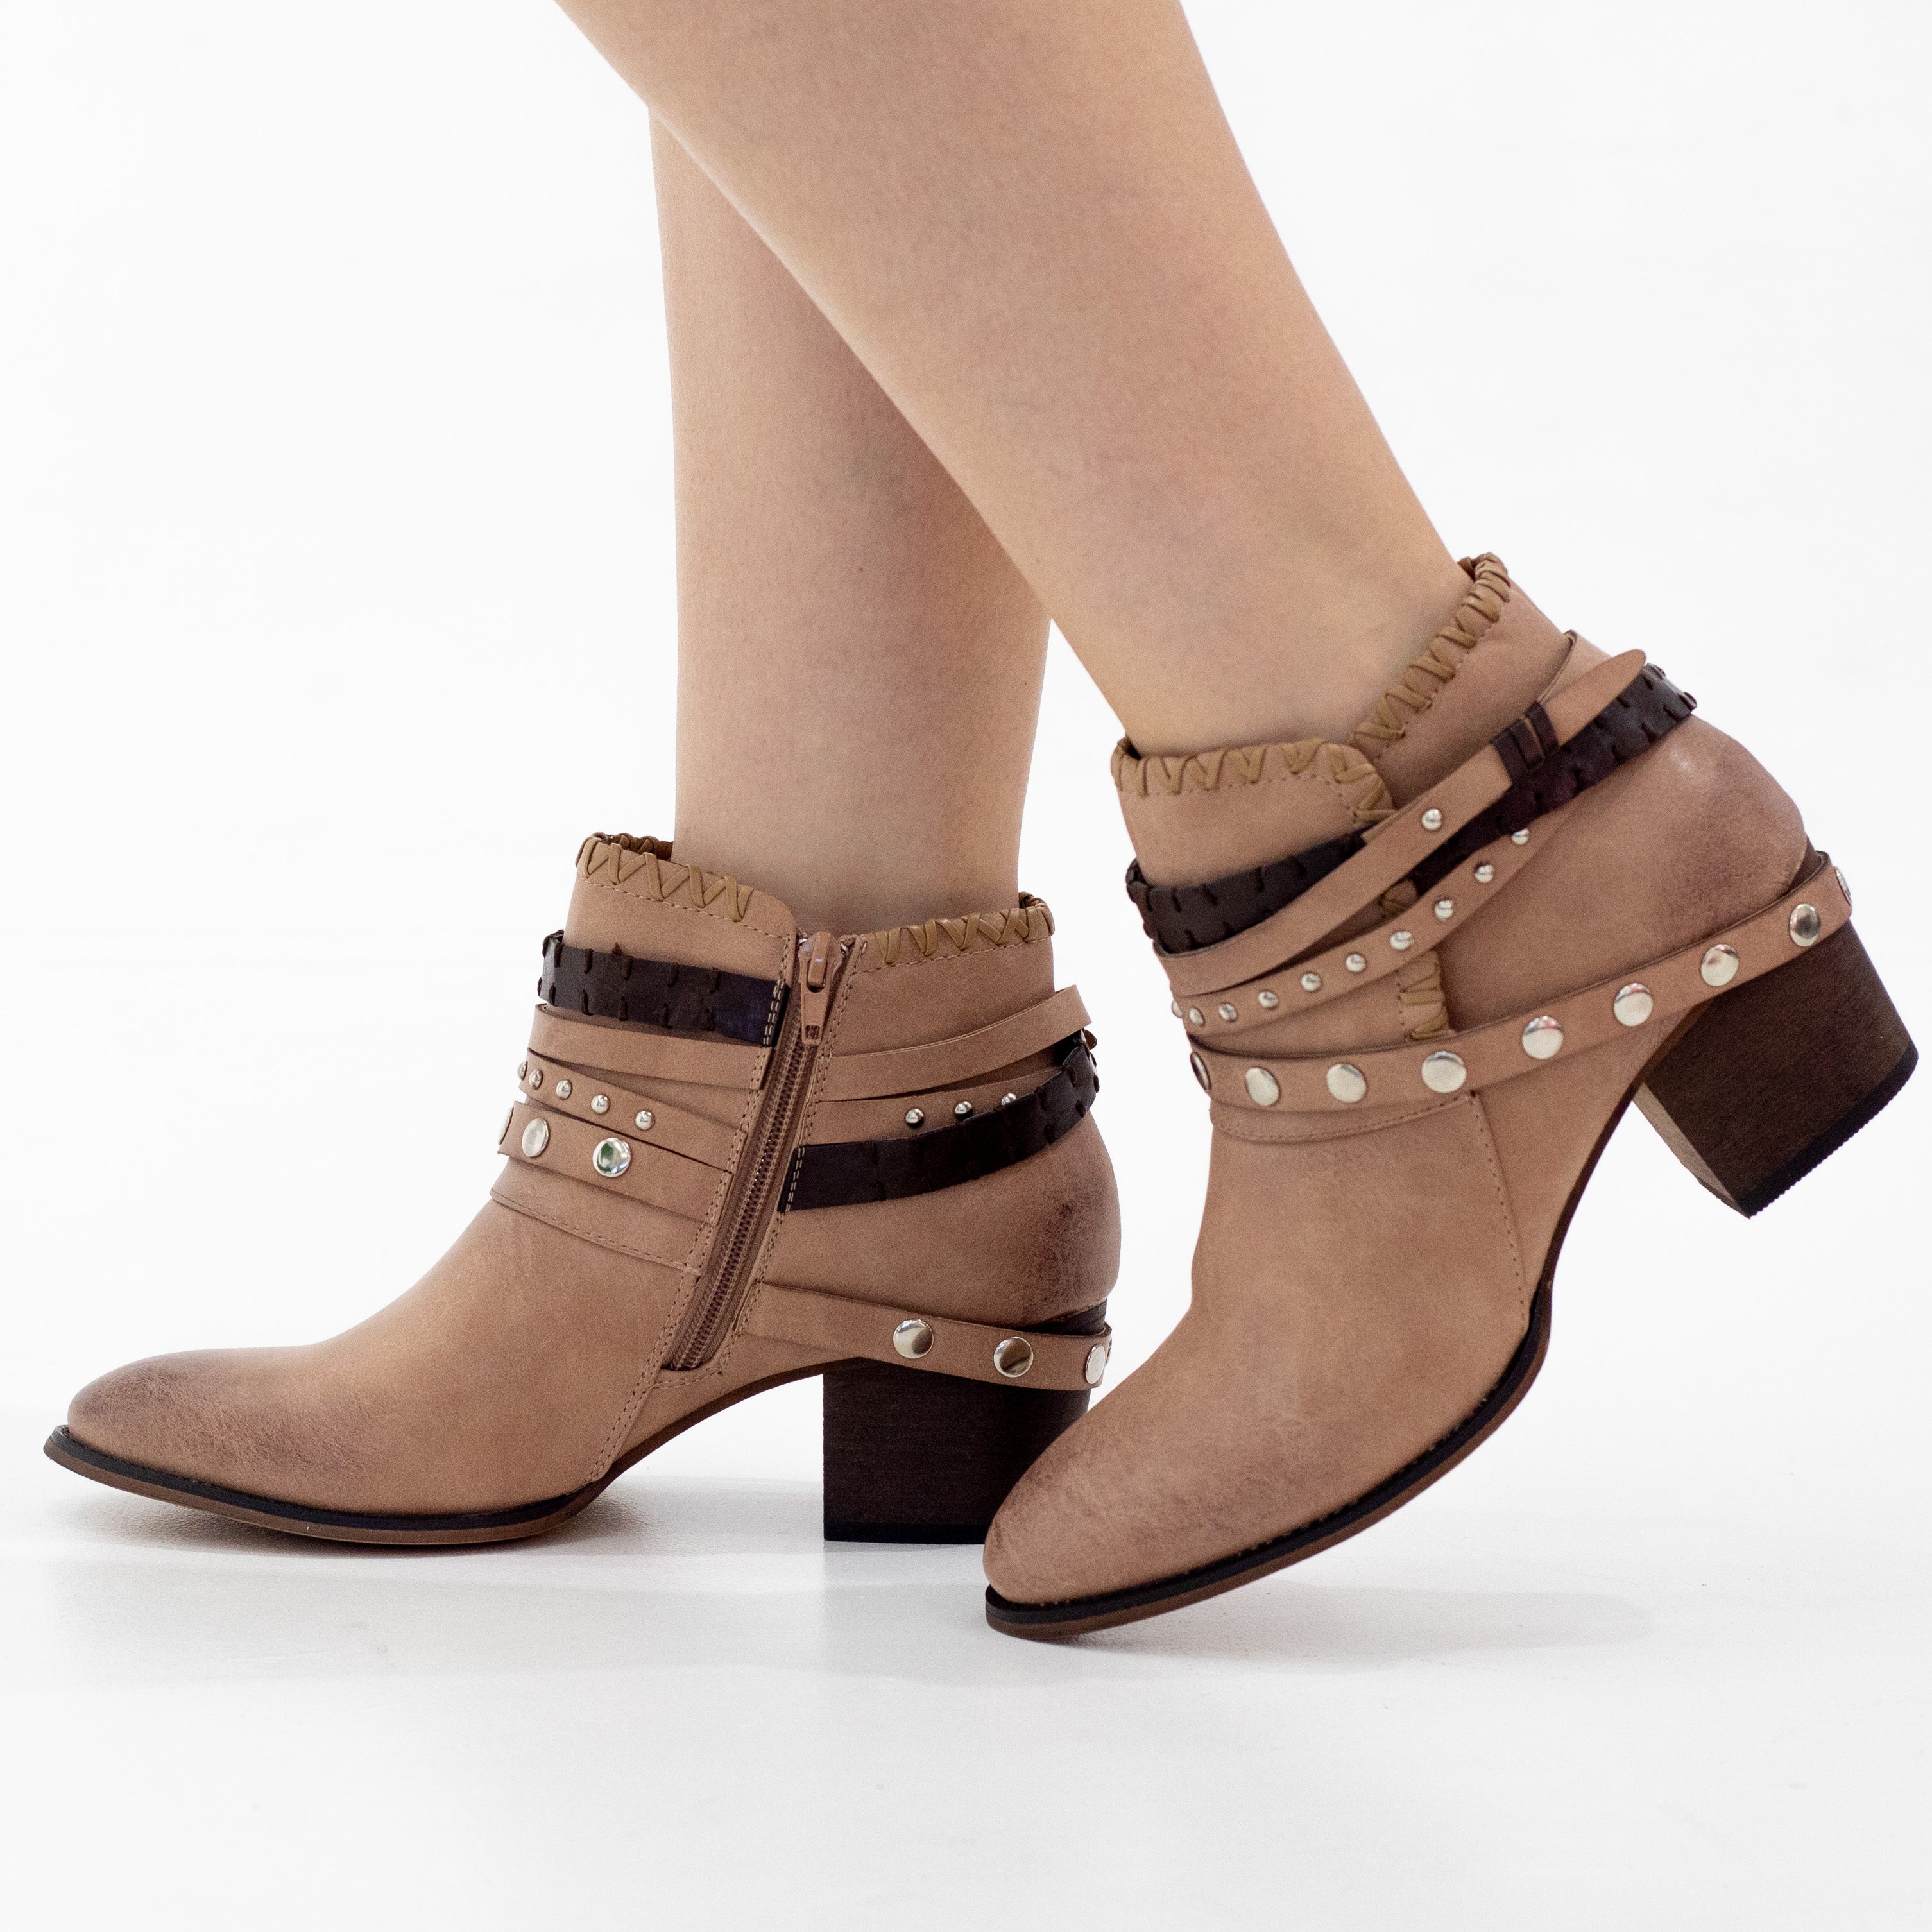 Sibyl cowboy with multiple strap ankle boot